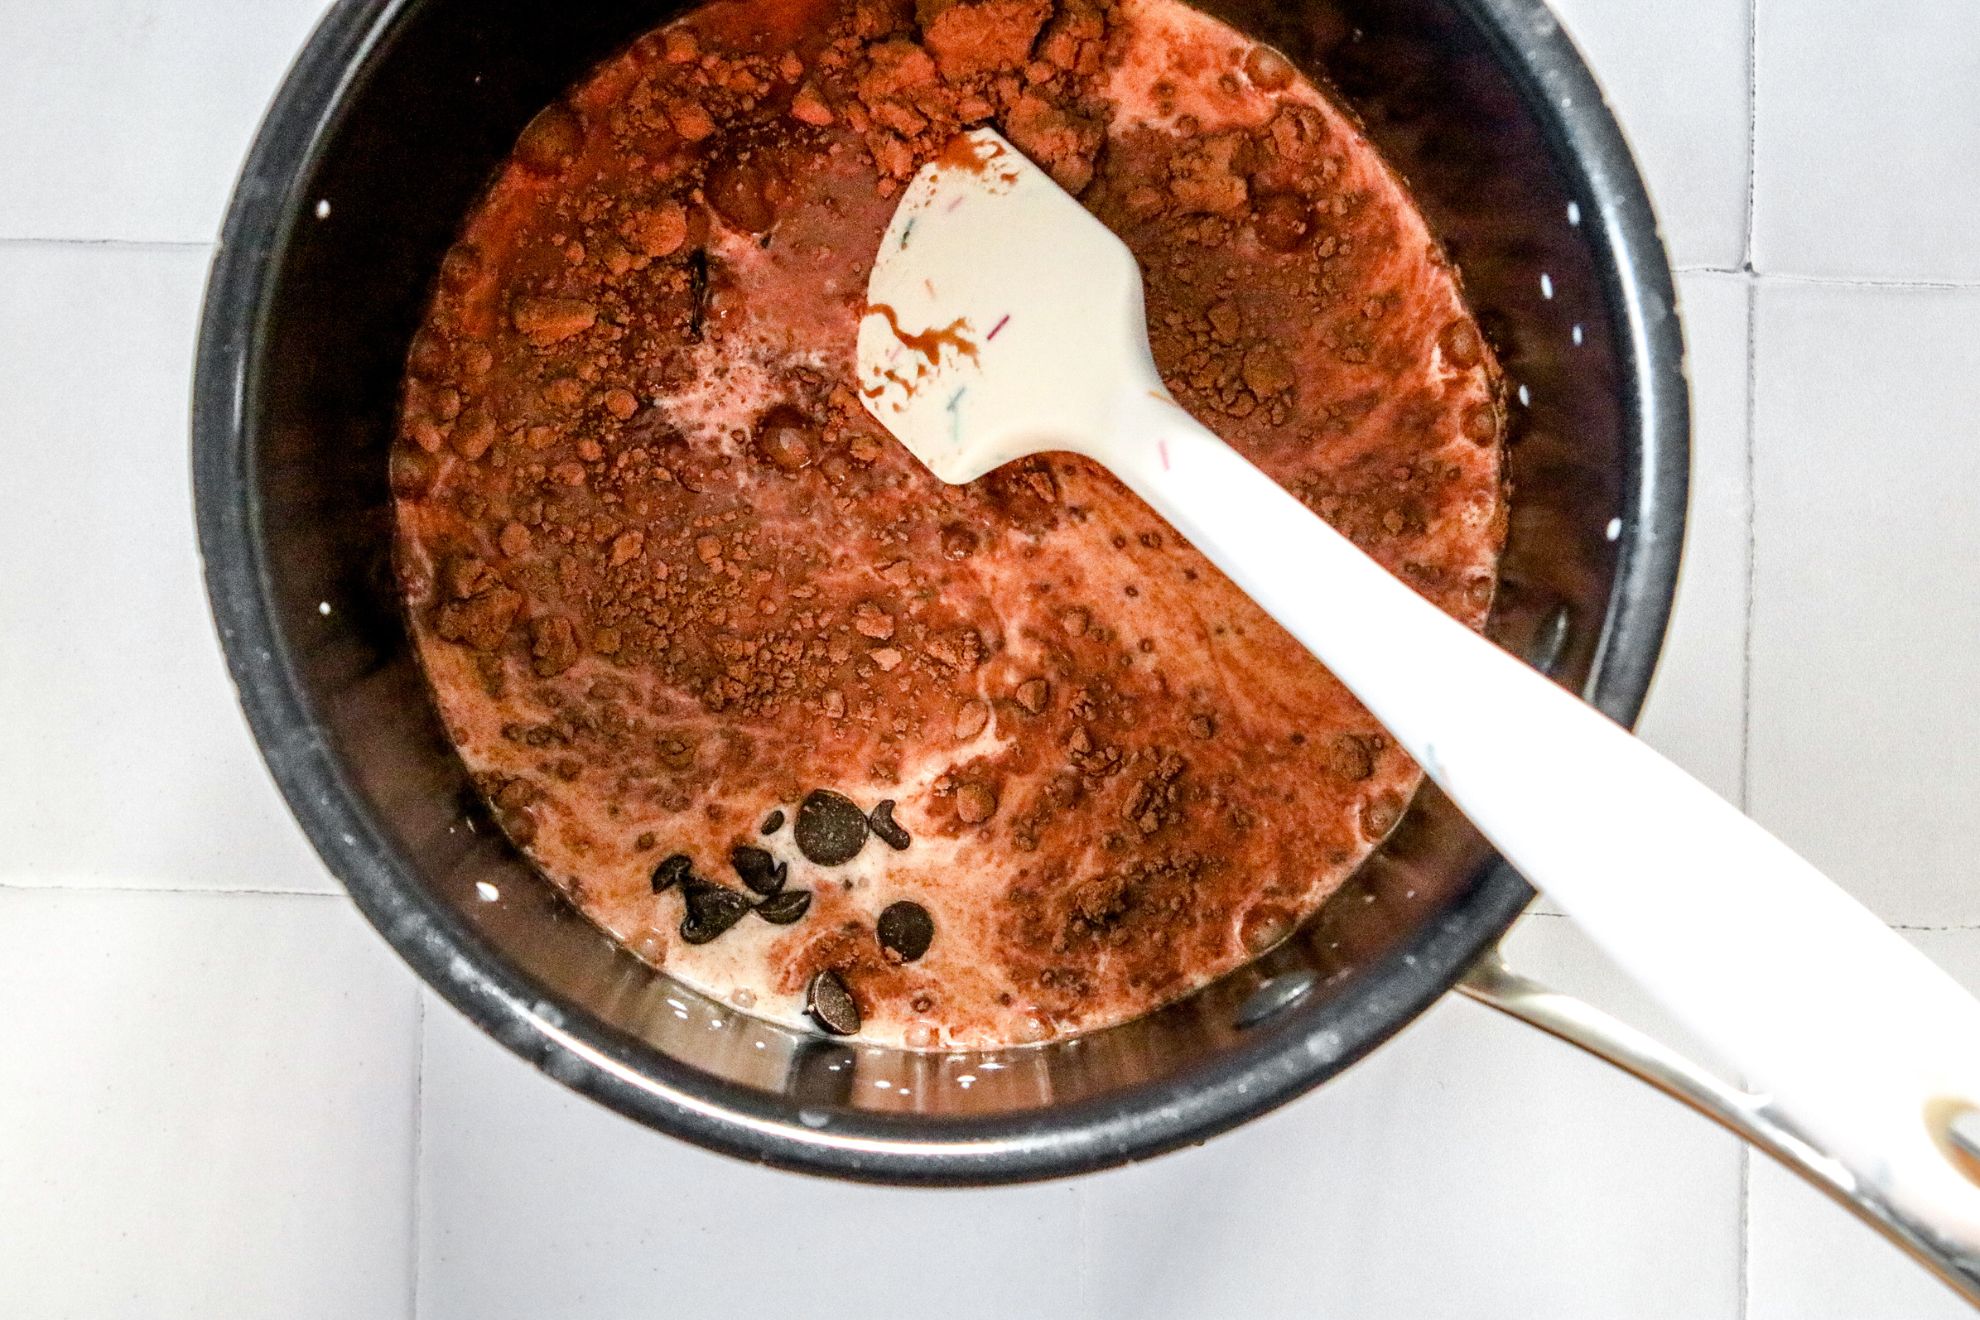 This is an overhead horizontal image of a black and silver pot with milk, cocoa powder, and chocolate chips in it. The pot sits on a white square tile surface. A white spatula is in the pot with the handle leaning against the side of the pot and pointing to the bottom right corner of the image.